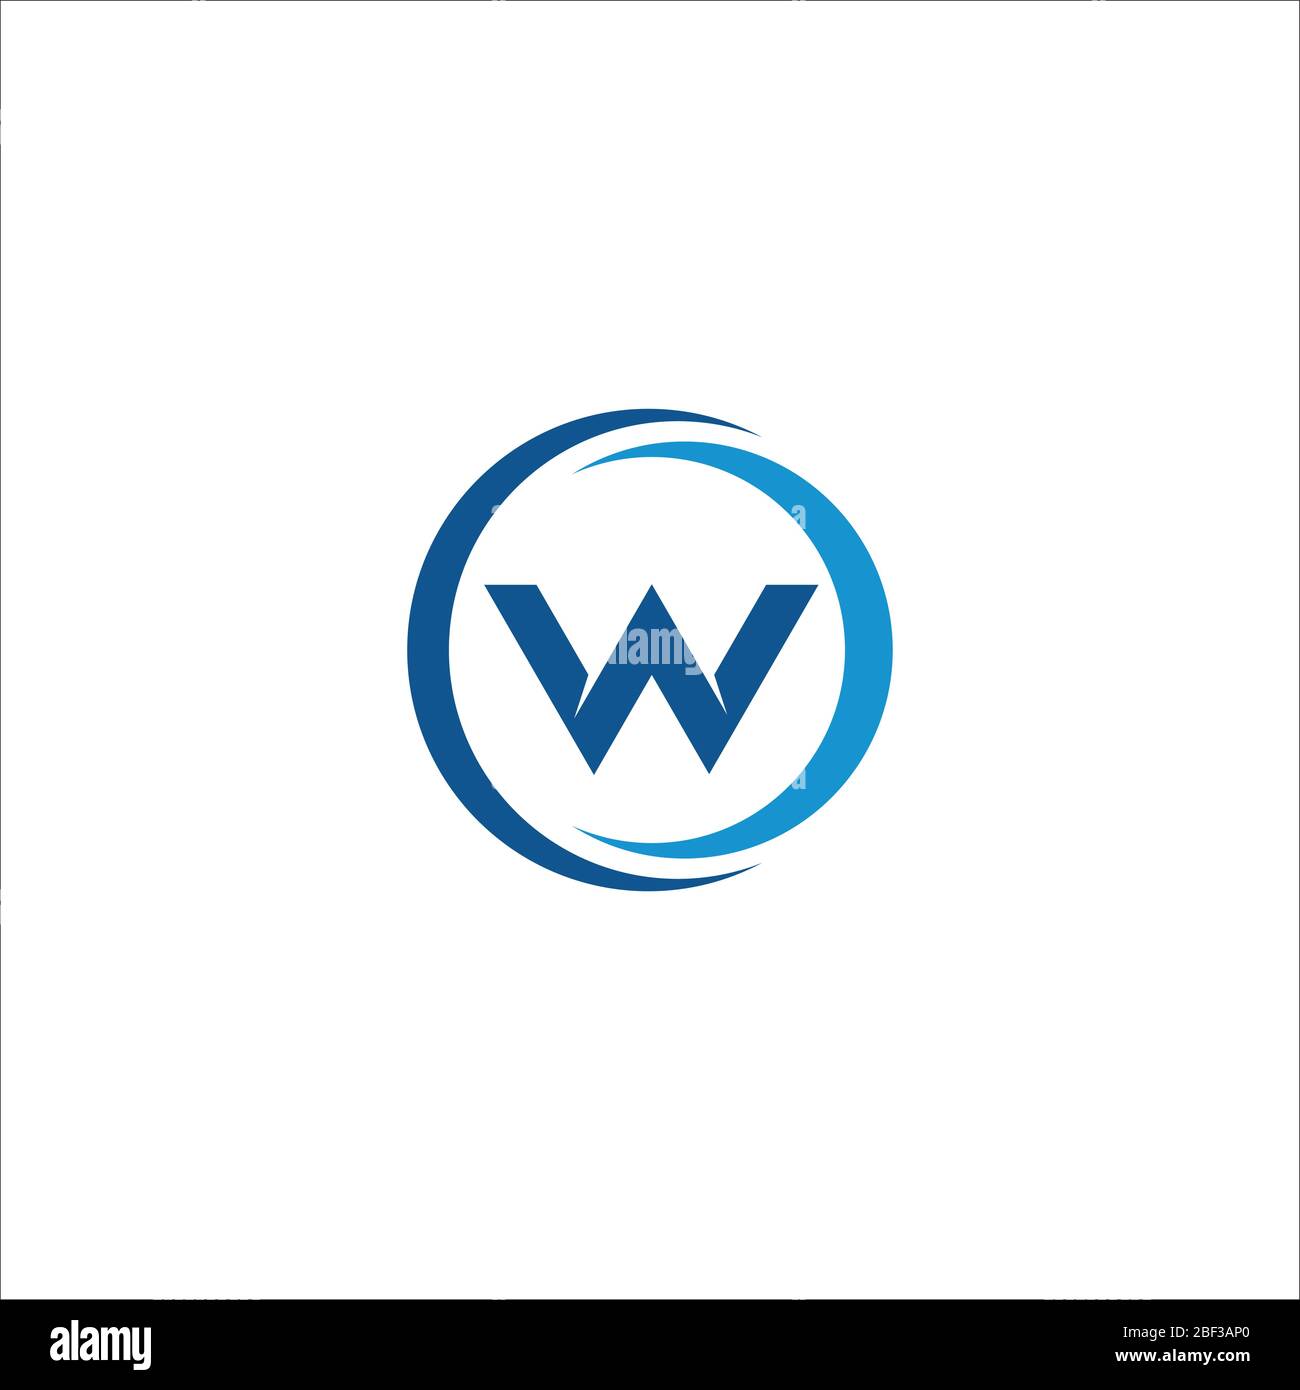 W Logos : Famous Logos Featuring the Letter W - Branding Reference